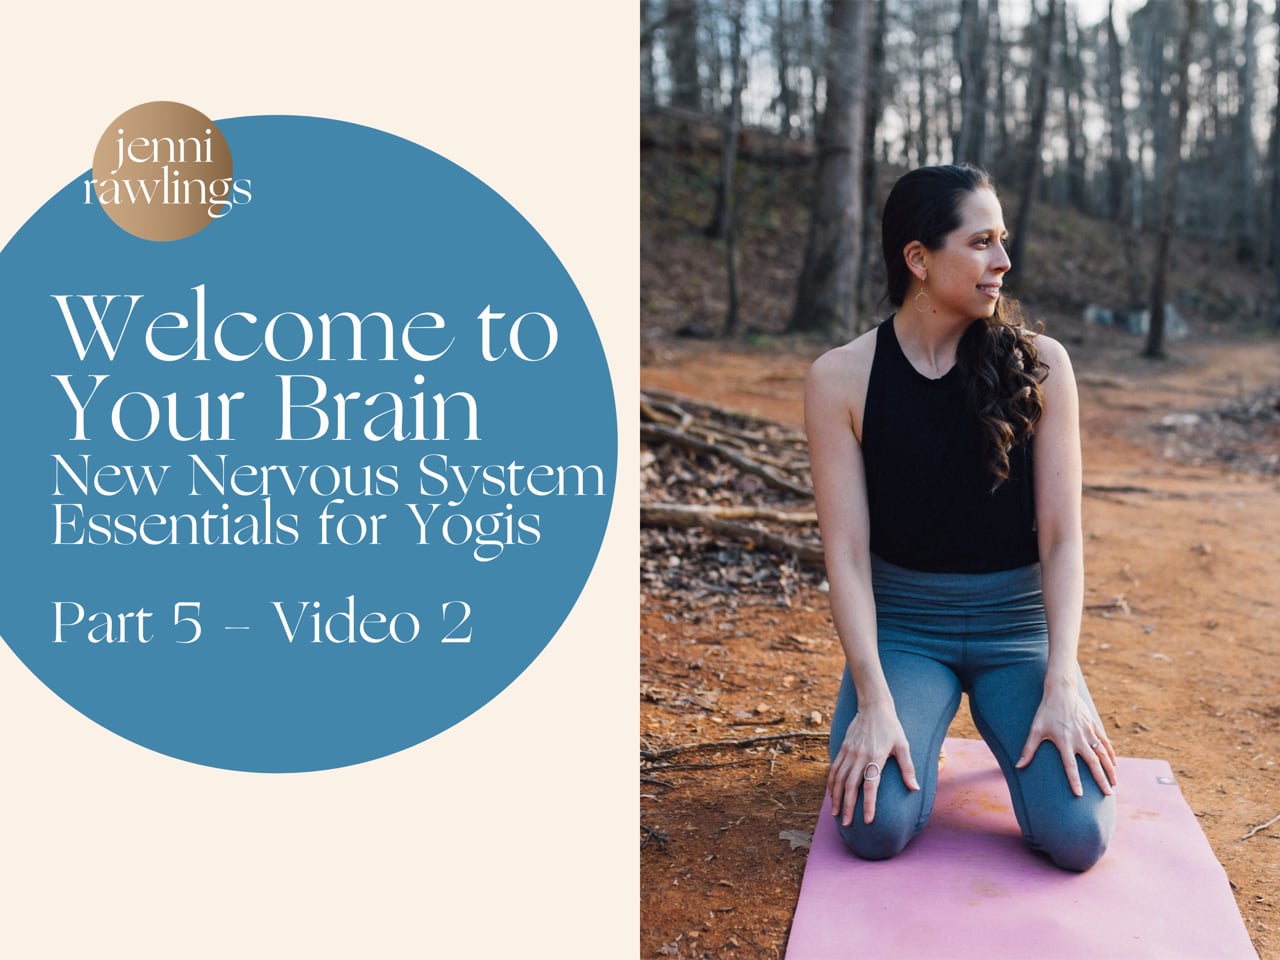 Part 5 Video 2 – Welcome to Your Brain